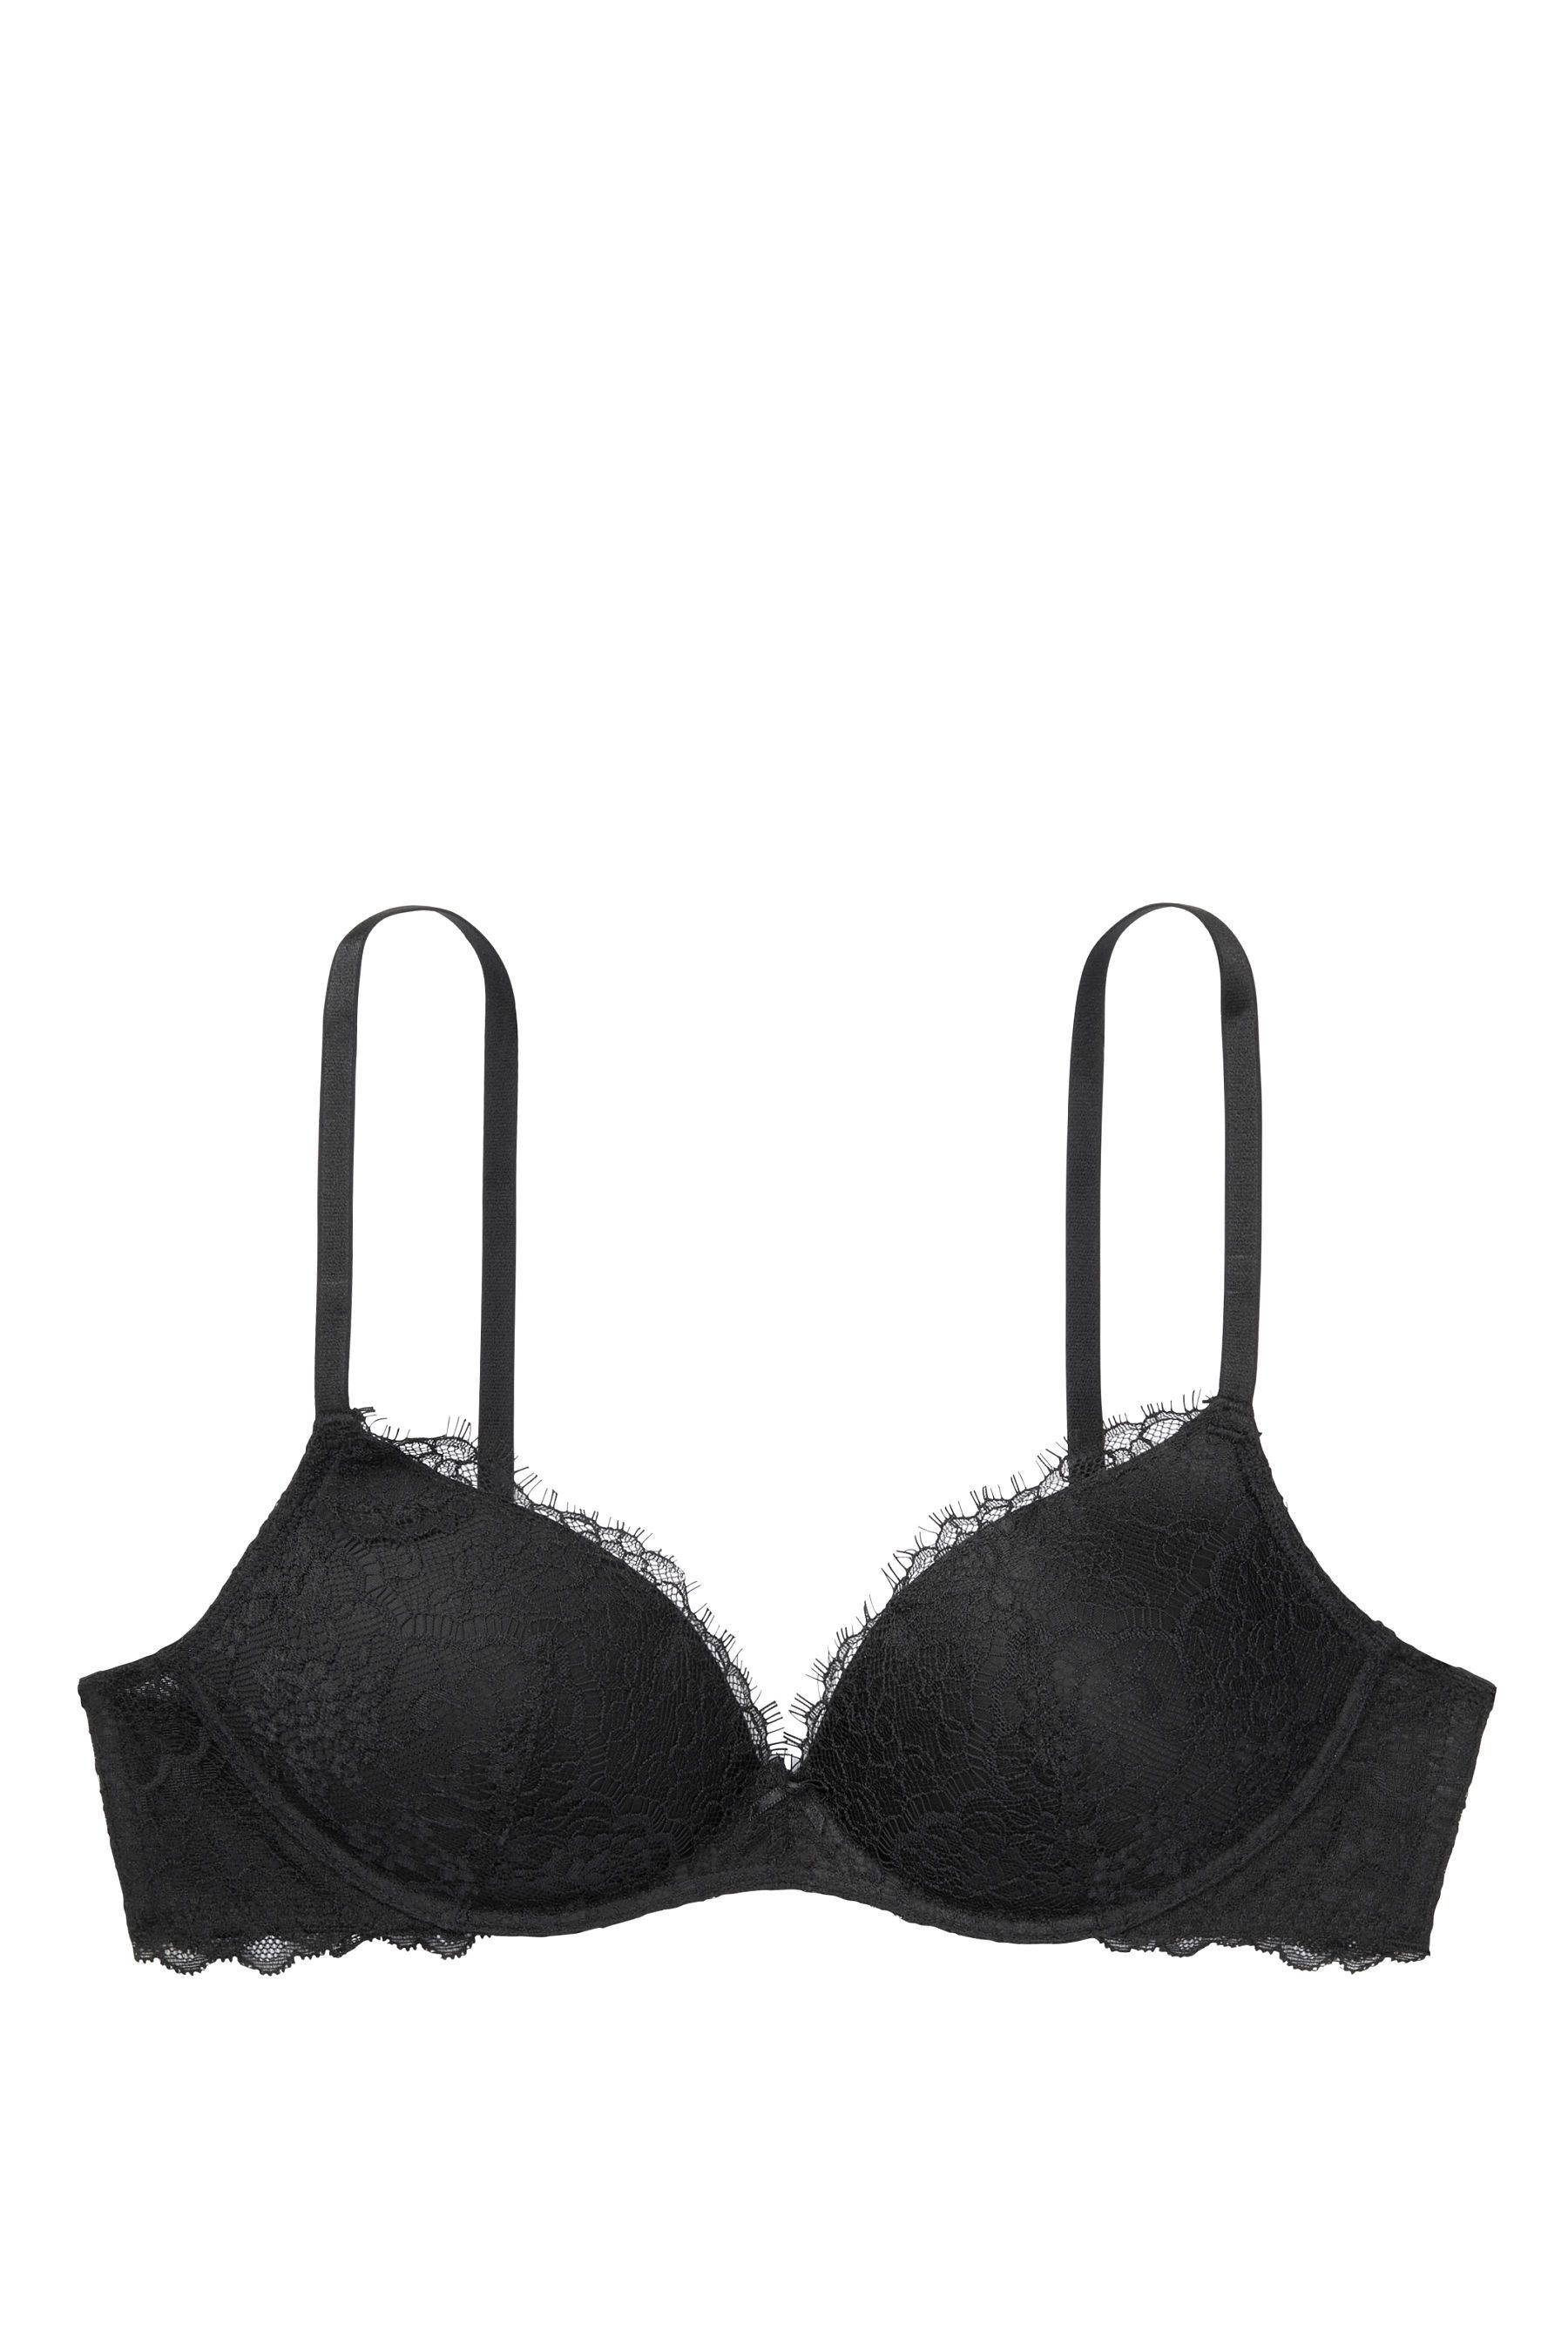 Buy Victoria's Secret Lace Lightly Lined Non Wired Bra from the ...